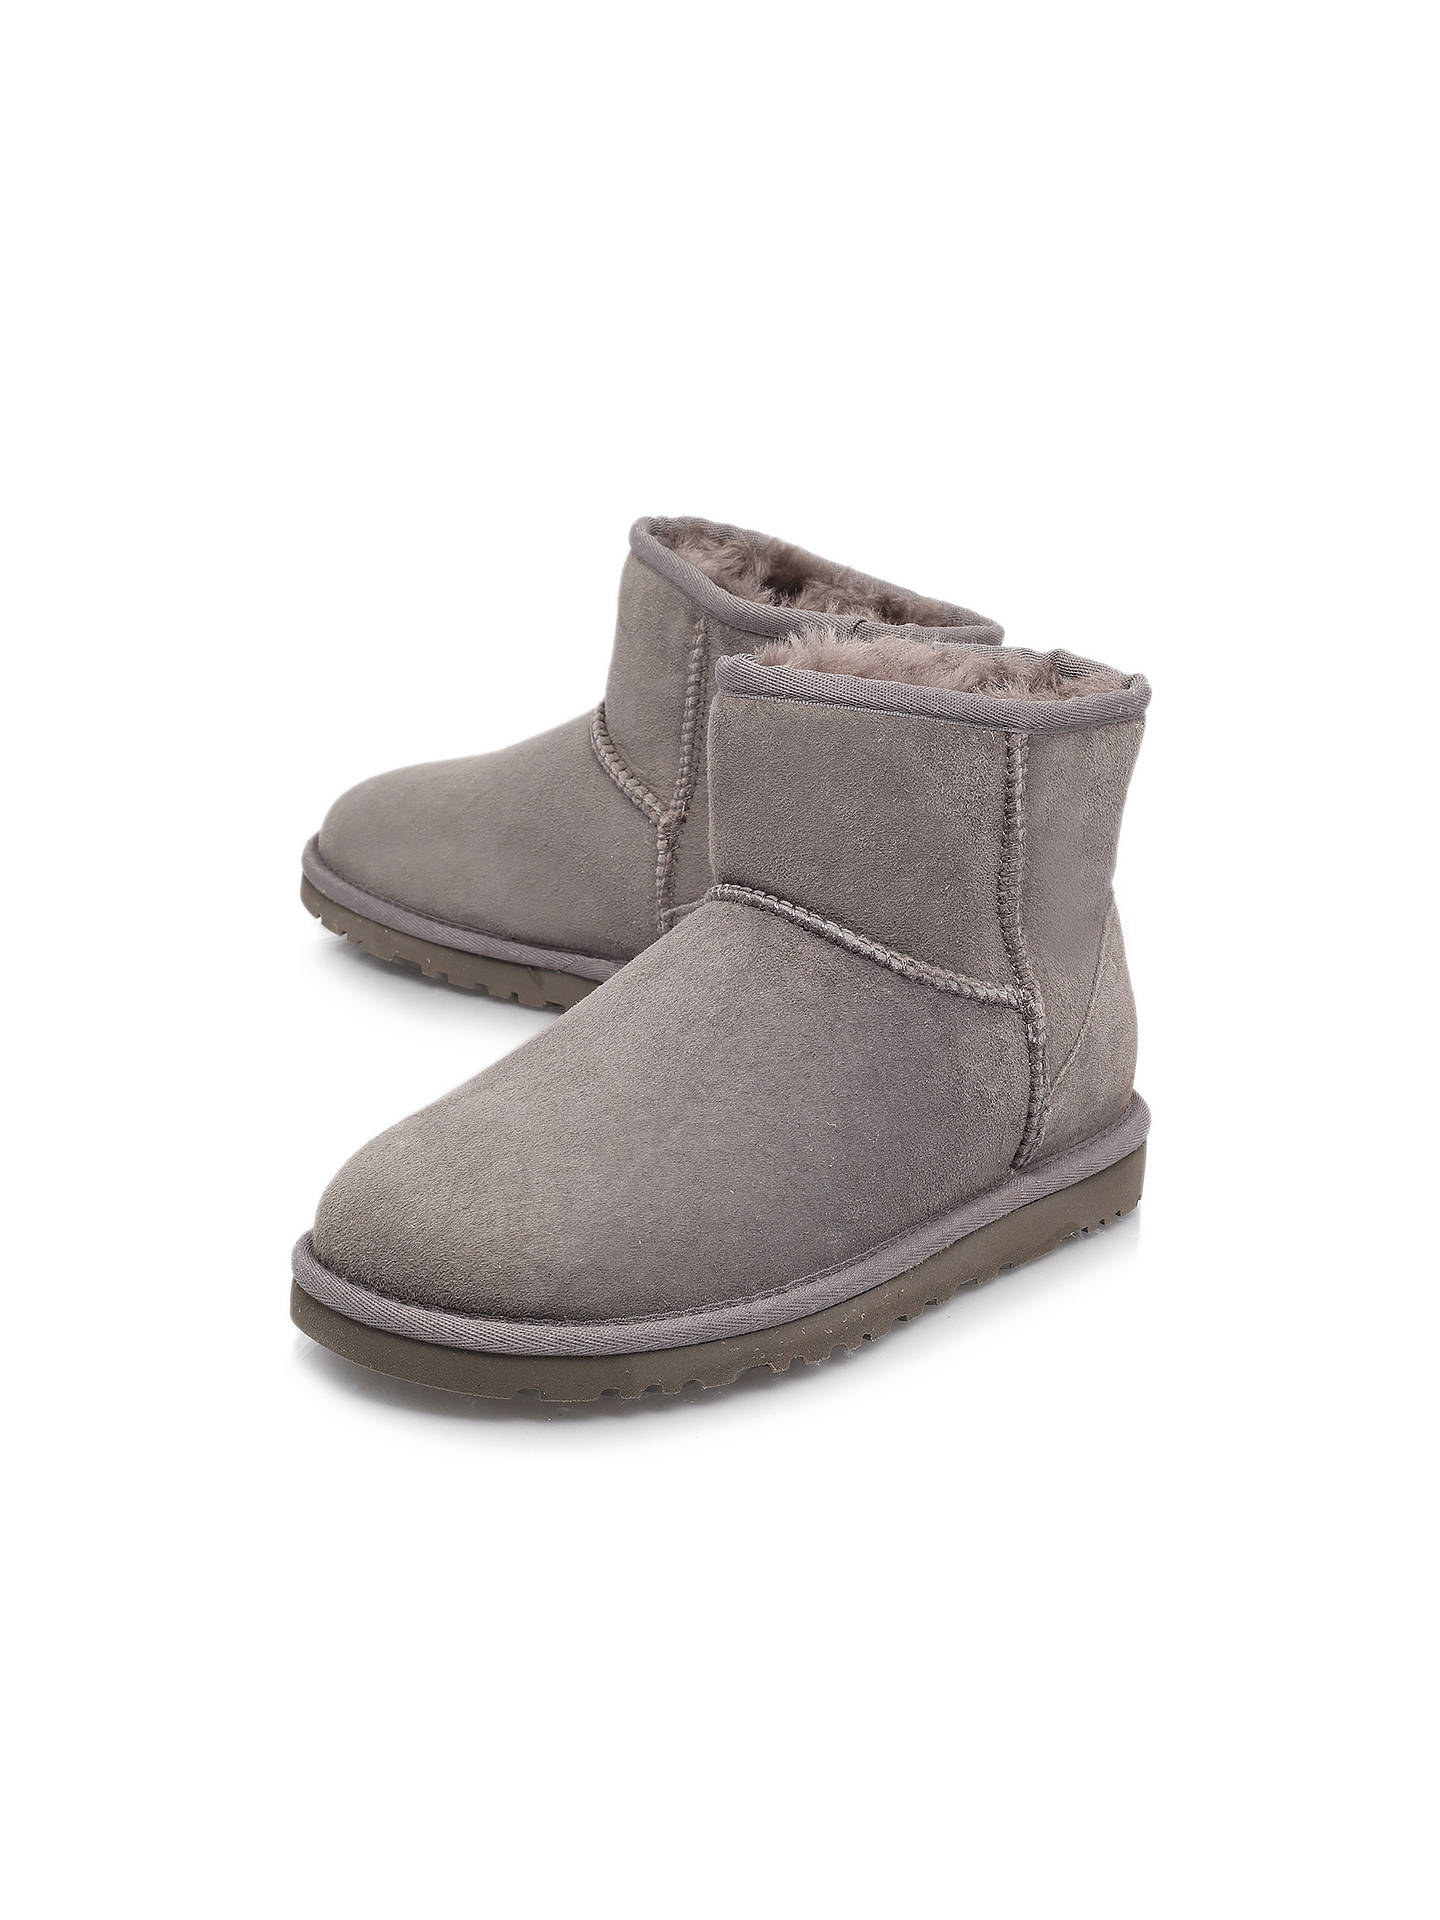 UGG Classic Mini Ankle Boots at John Lewis & Partners